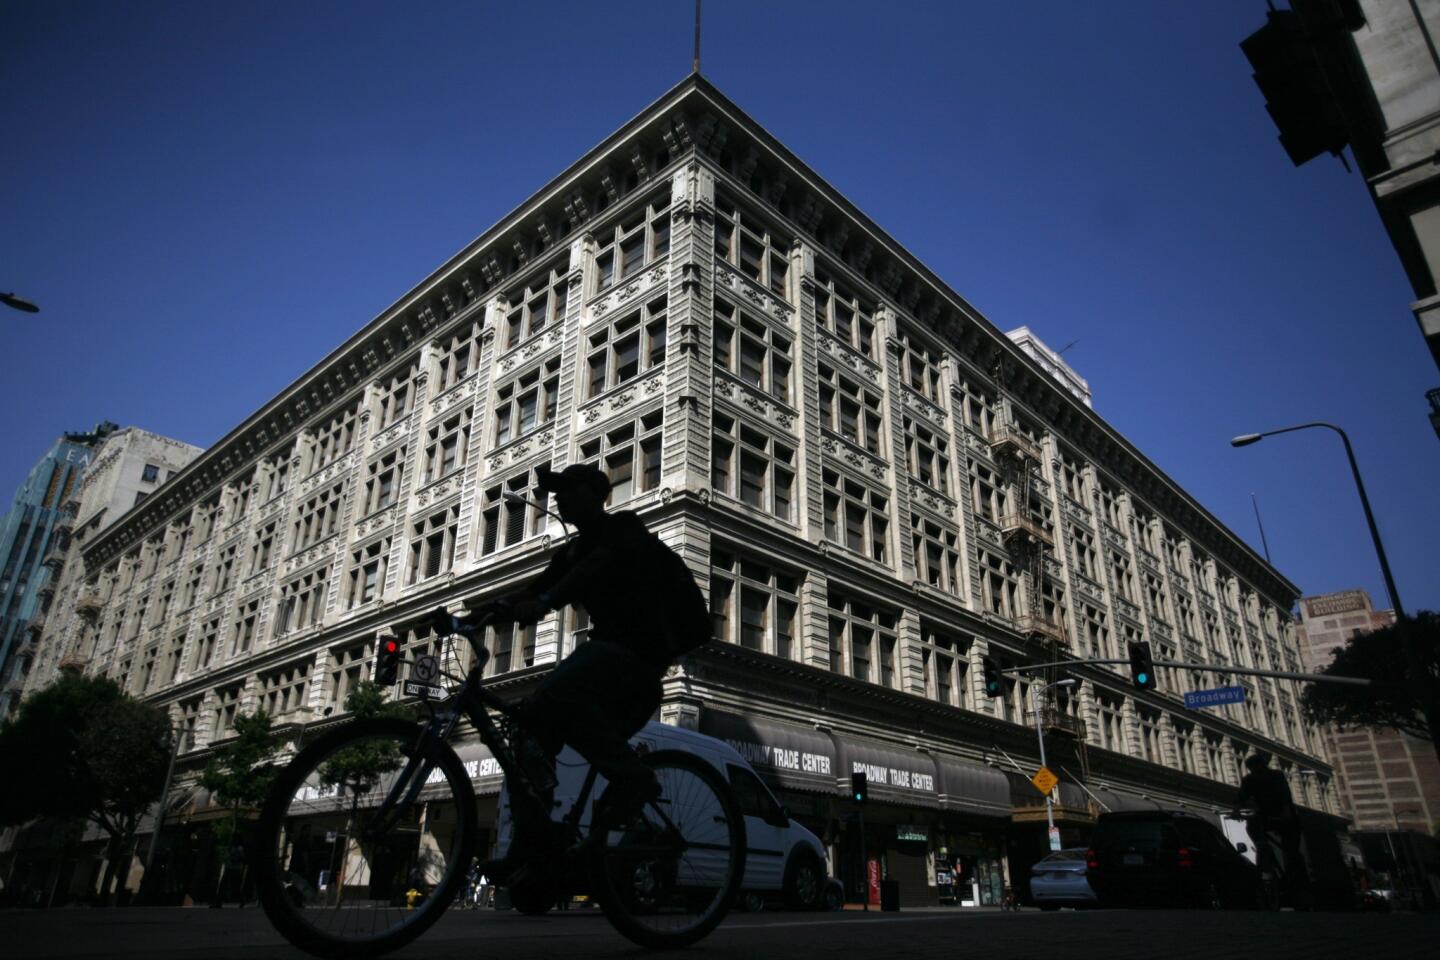 A bicyclist passes the corner of 8th and Broadway, where the Broadway Trade Center, an enormous 100-year-old building that was once the May Co. department store, may soon be up for sale. The now run-down building may be converted to housing, hotel, office and retail use.